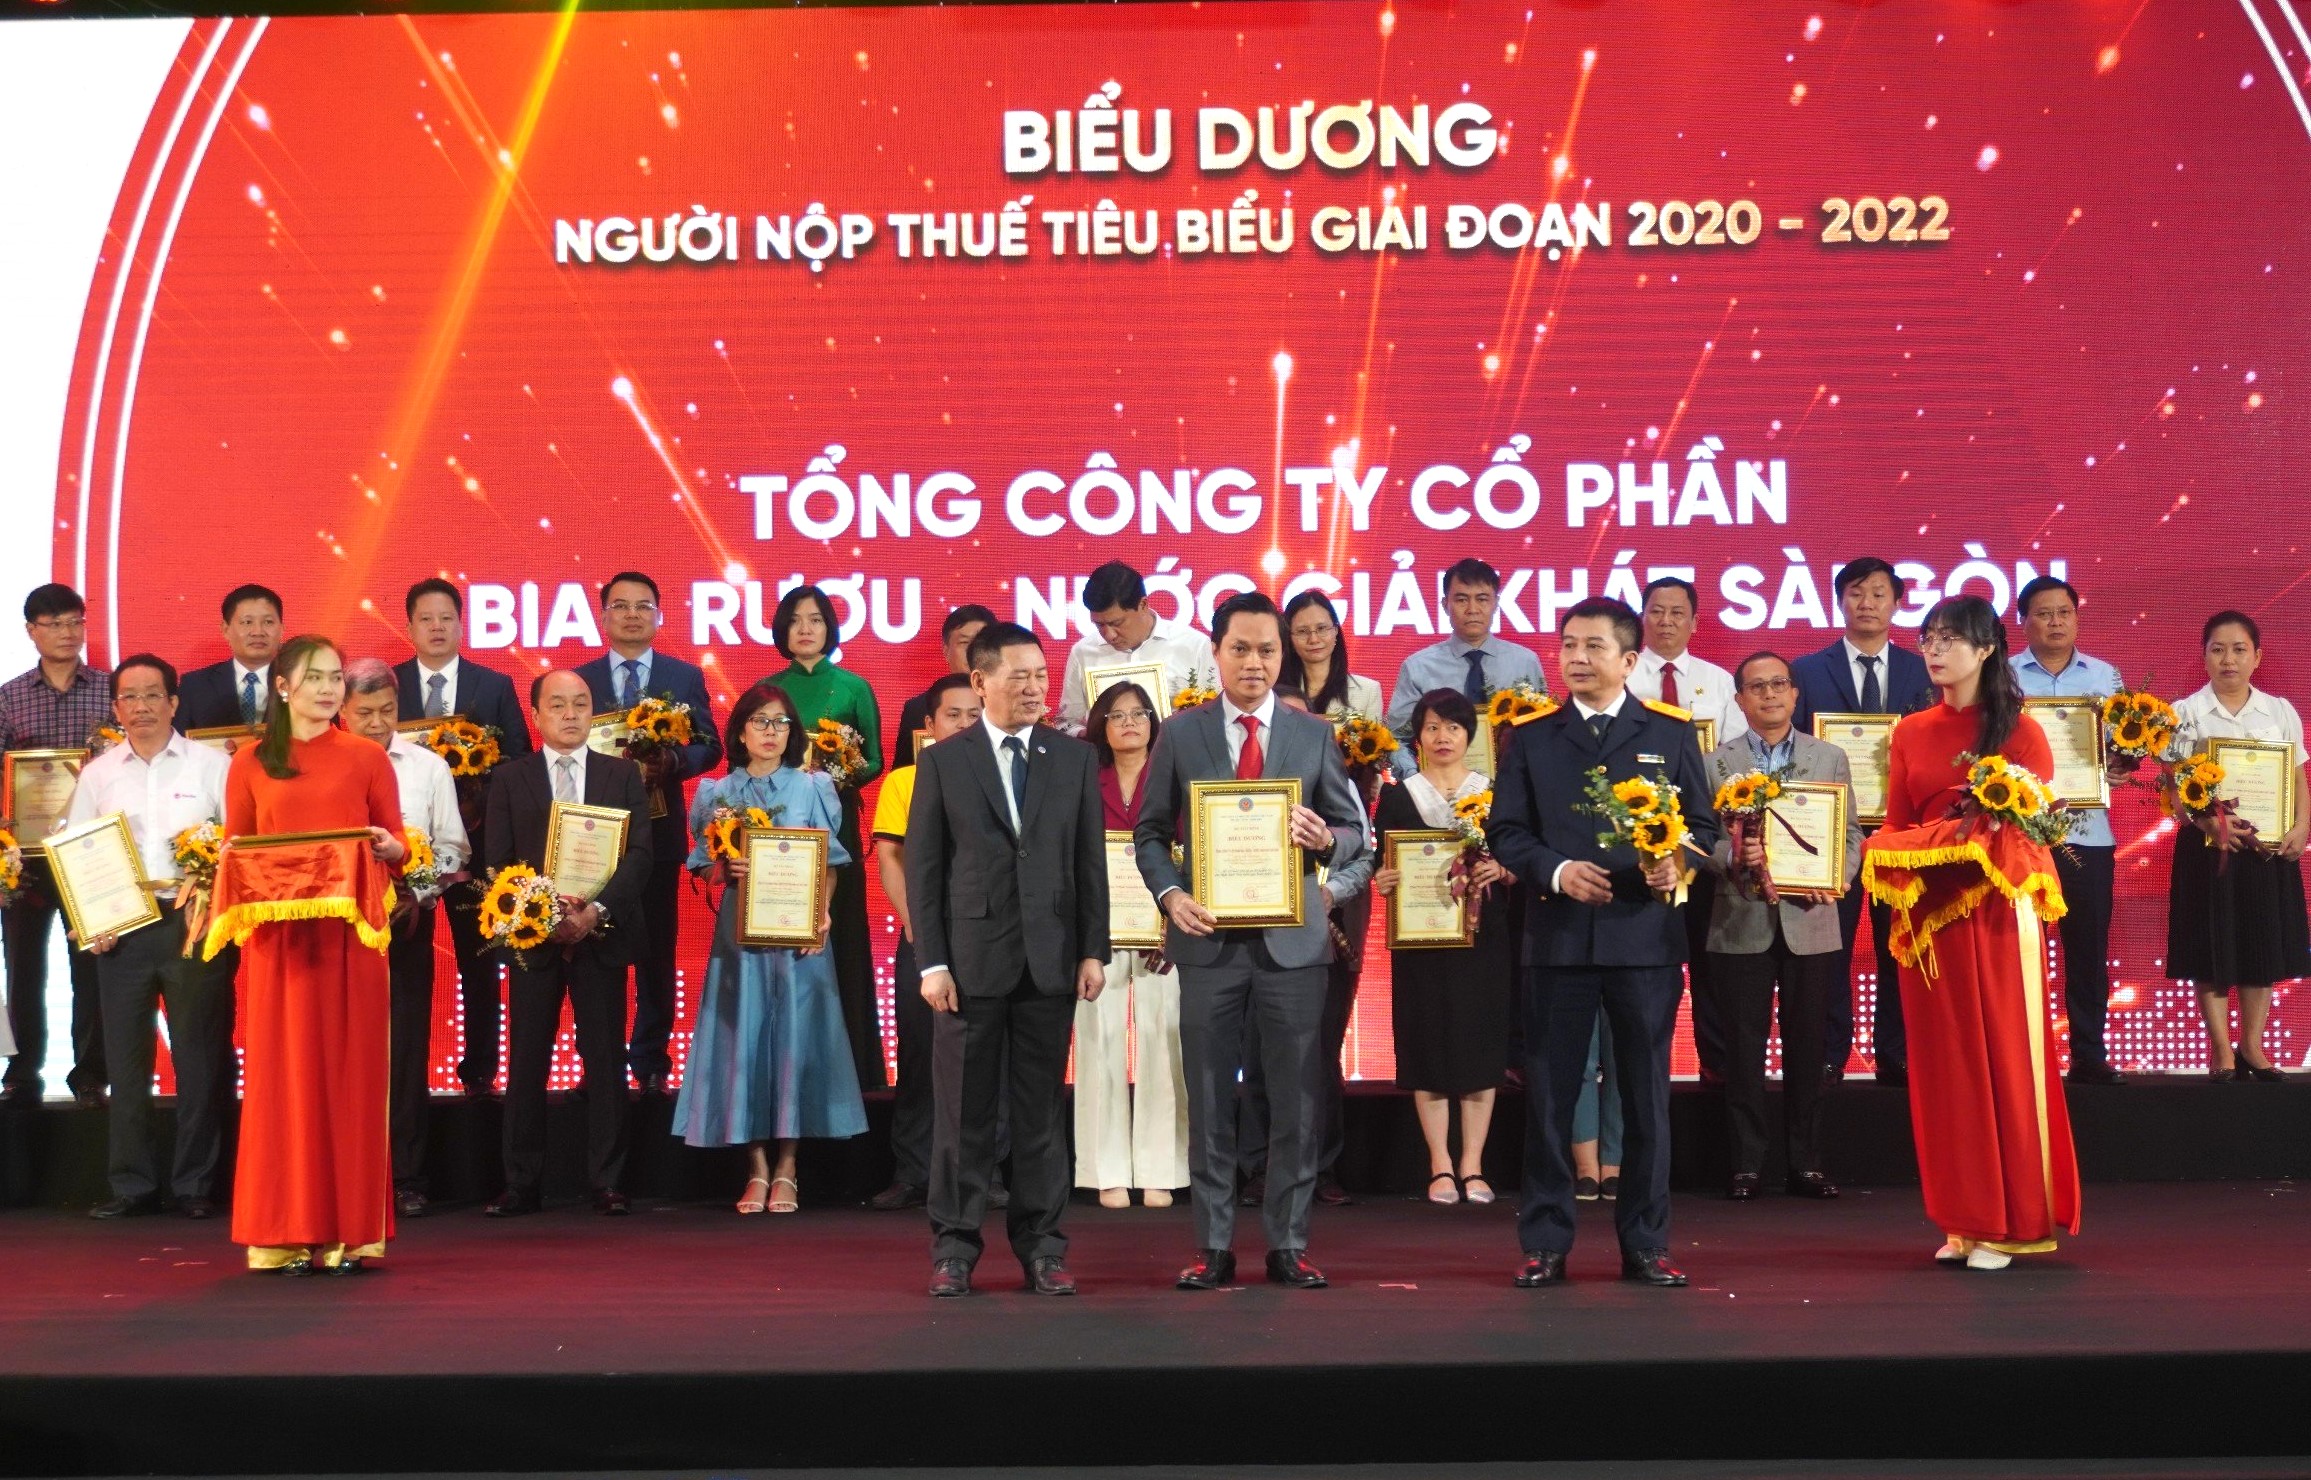 SABECO HONOURED AS OUTSTANDING TAXPAYER IN VIETNAM FOR 2020-2022